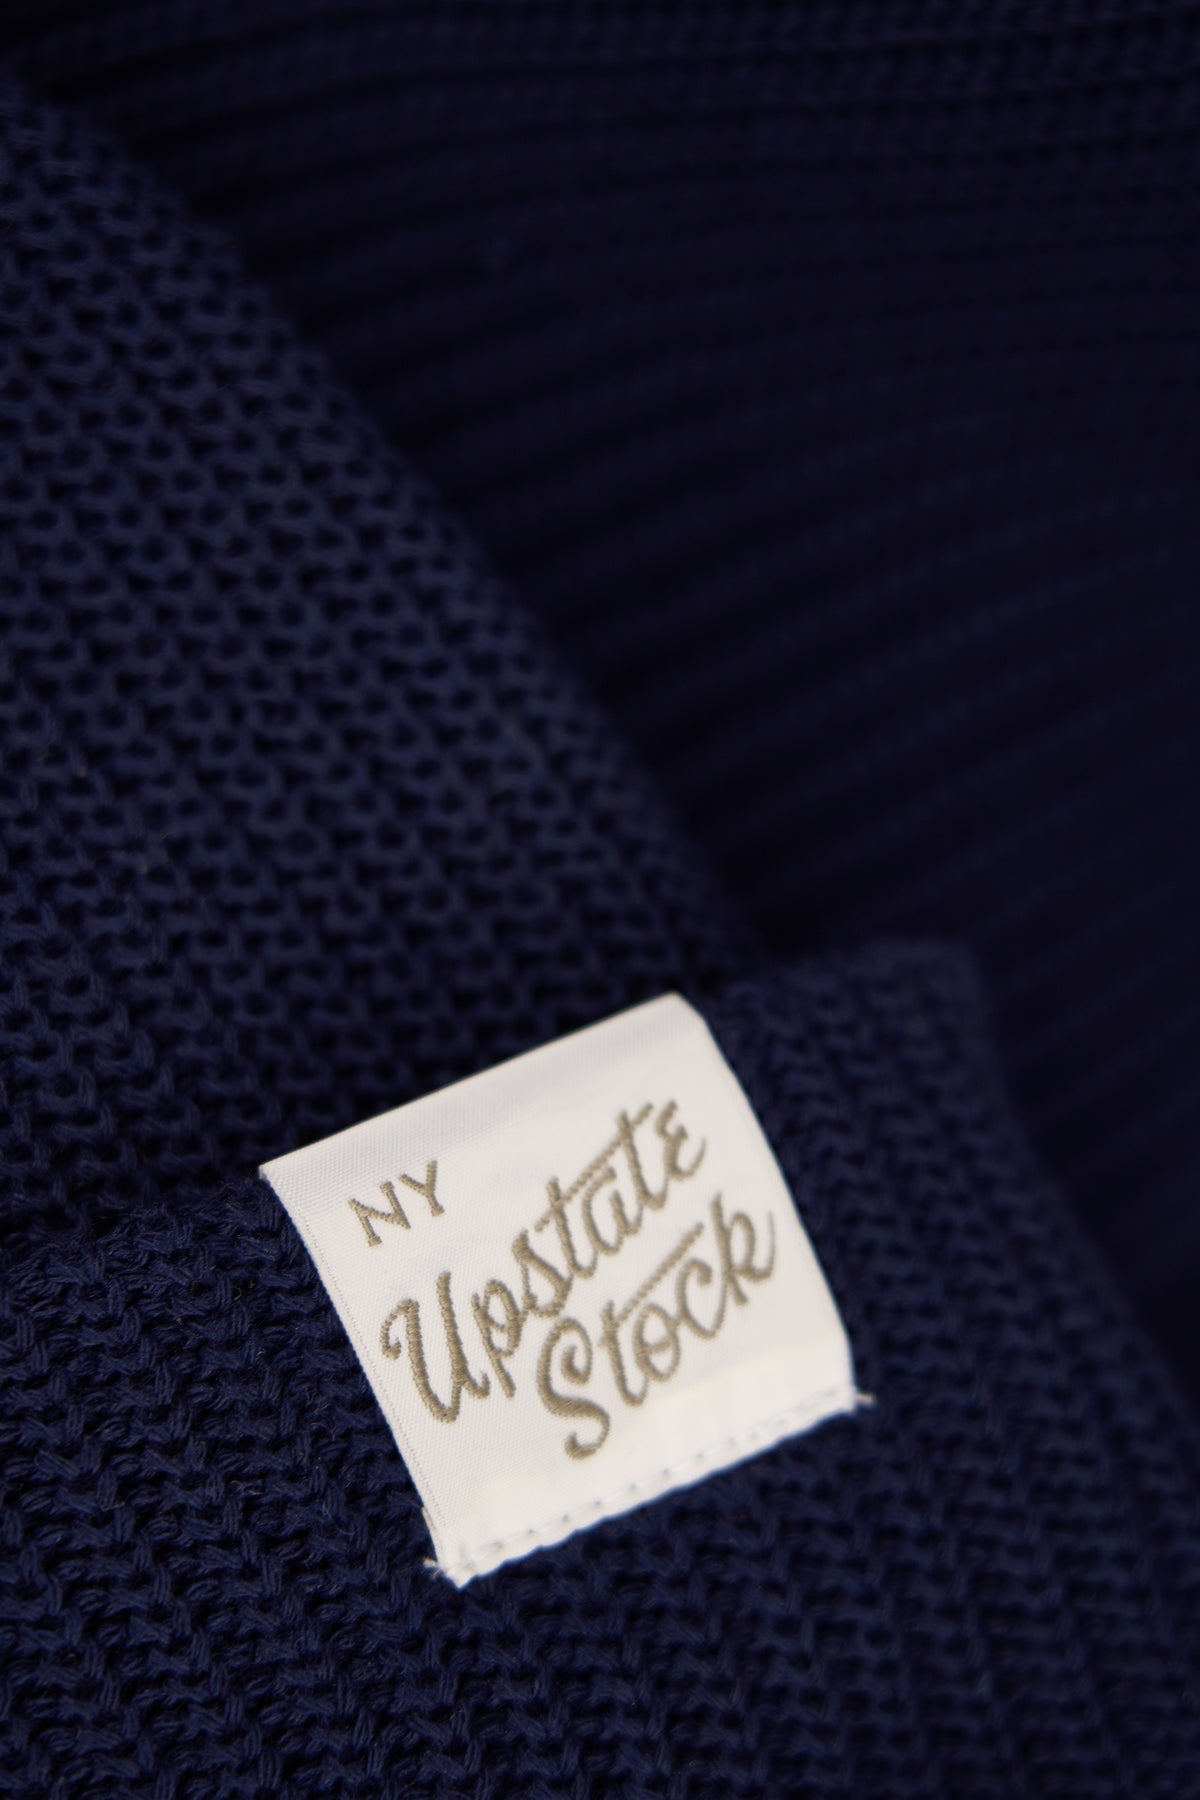 Navy Upcycled Wool Watchcap